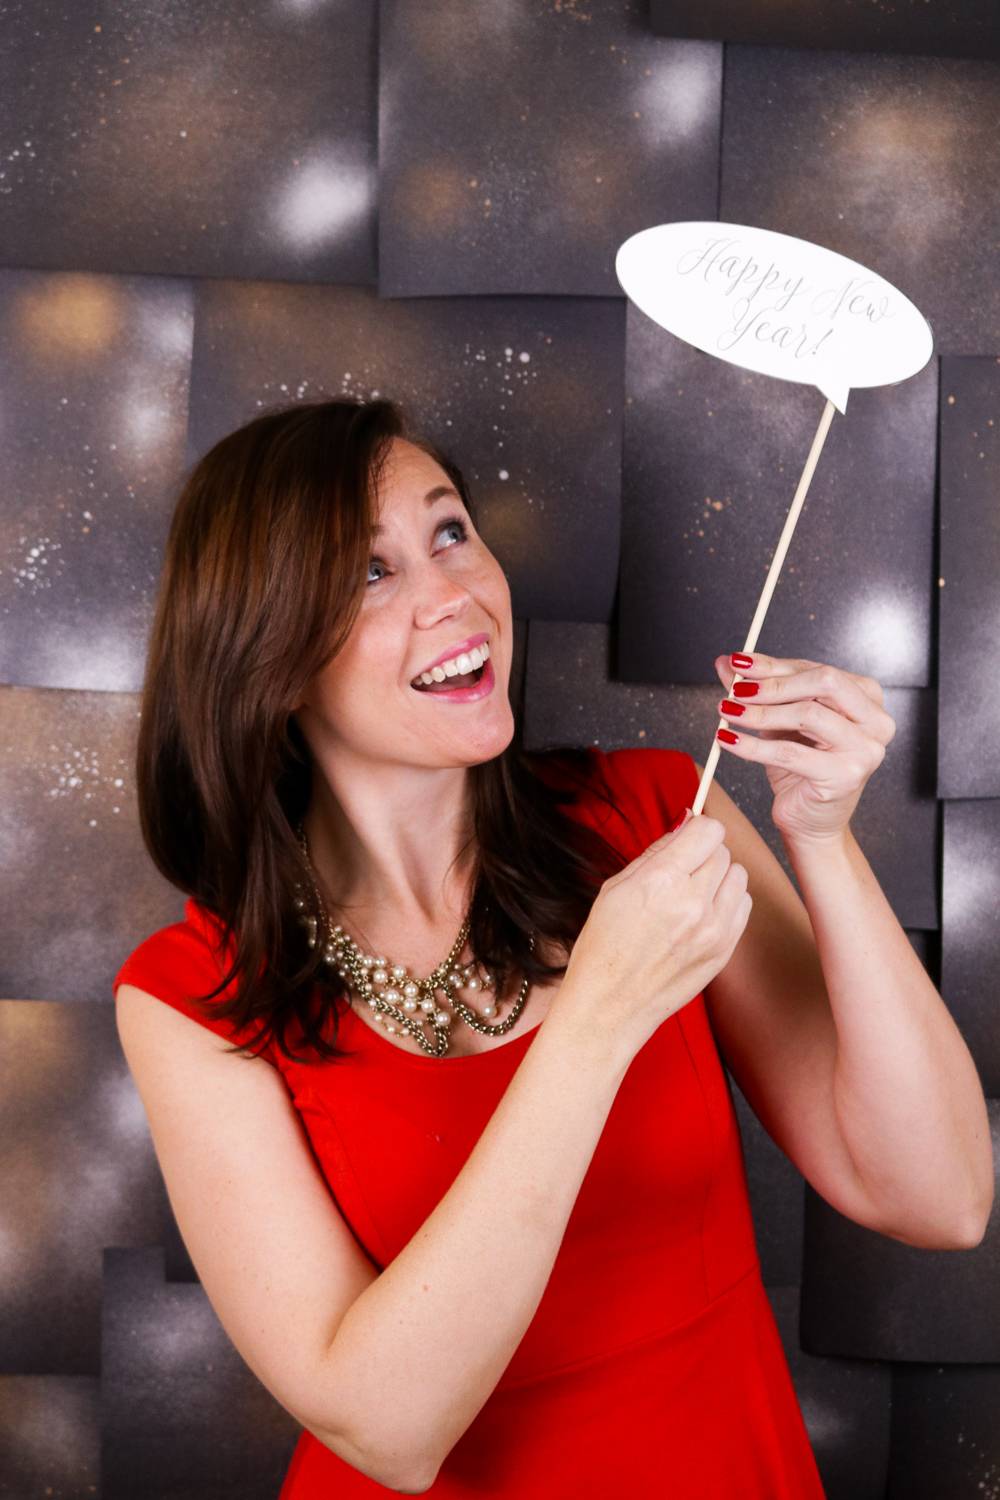 Printable Photo Props for New Year's